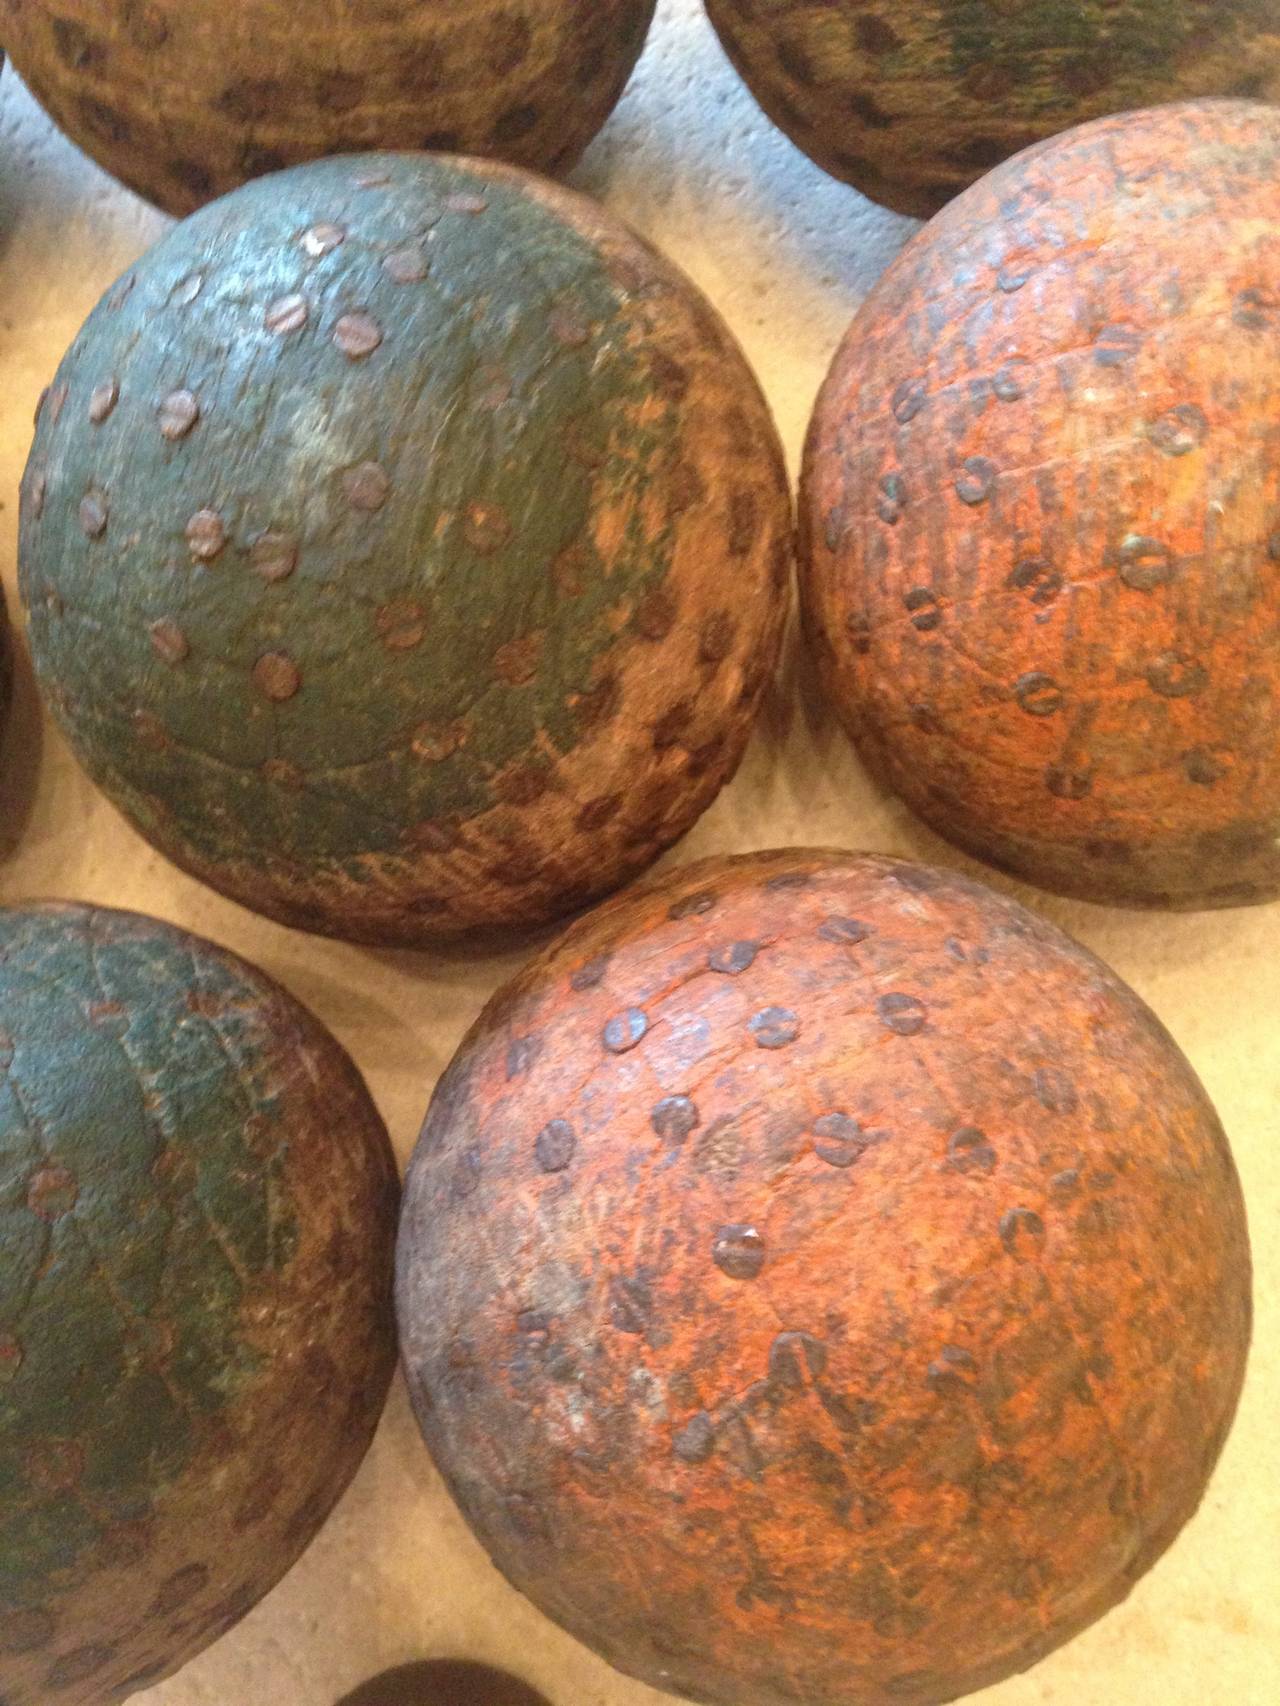 This is a very rare and complete set of boules, featuring the little target one, as well as four half painted in dark green and four in a salmon color. The boules themselves are hand-carved and studded with original 19th century nails. Used to play